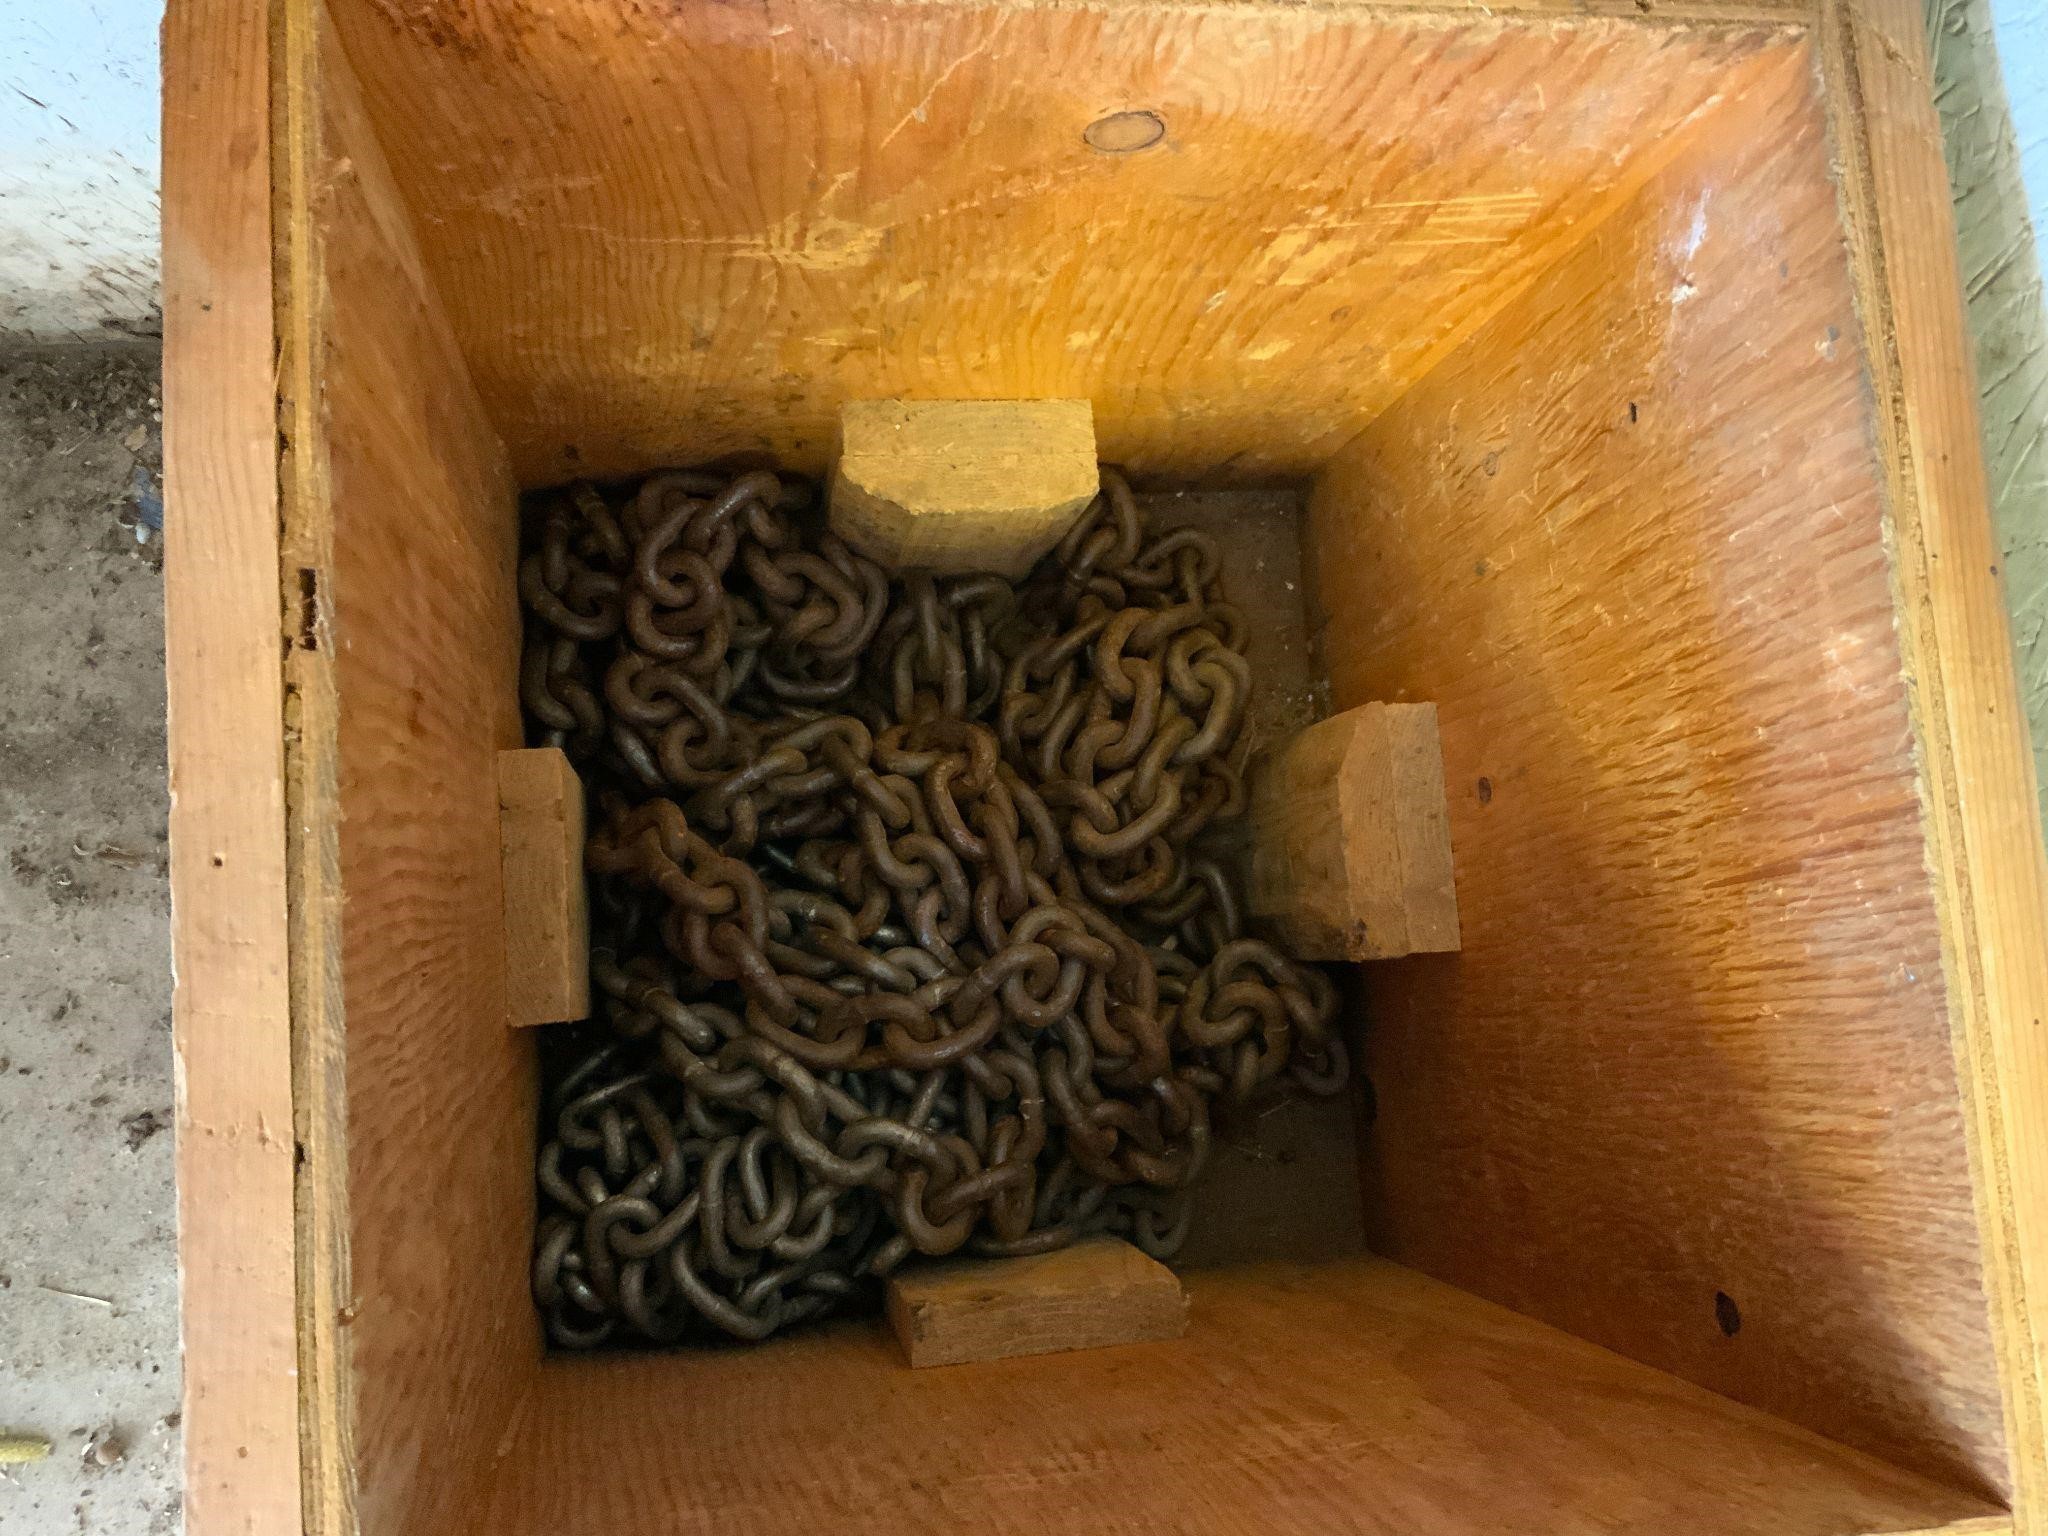 Heavy Tow Chains In Wood Crate